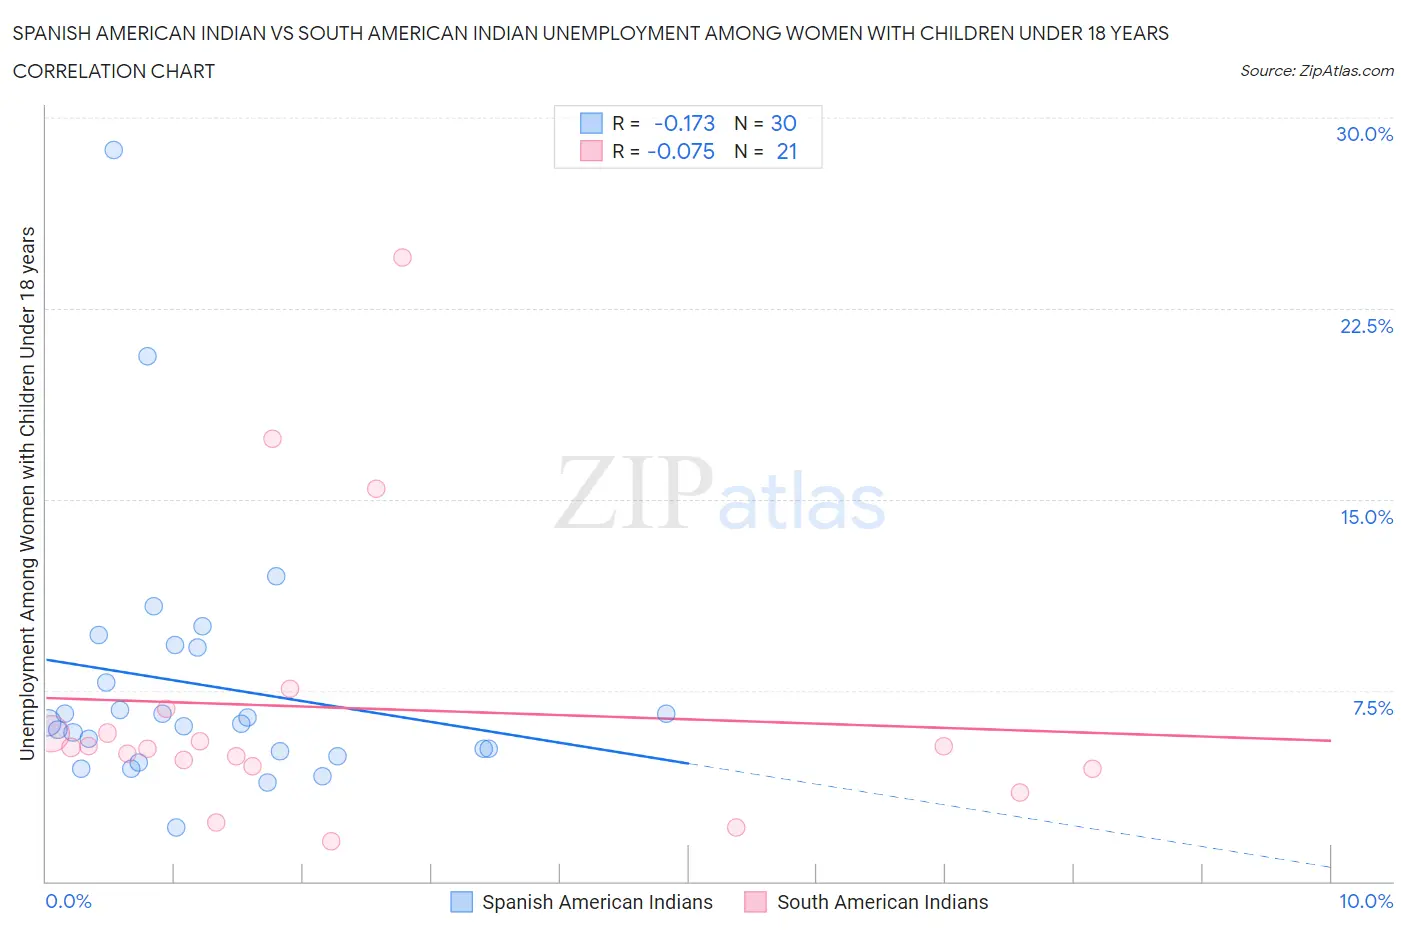 Spanish American Indian vs South American Indian Unemployment Among Women with Children Under 18 years